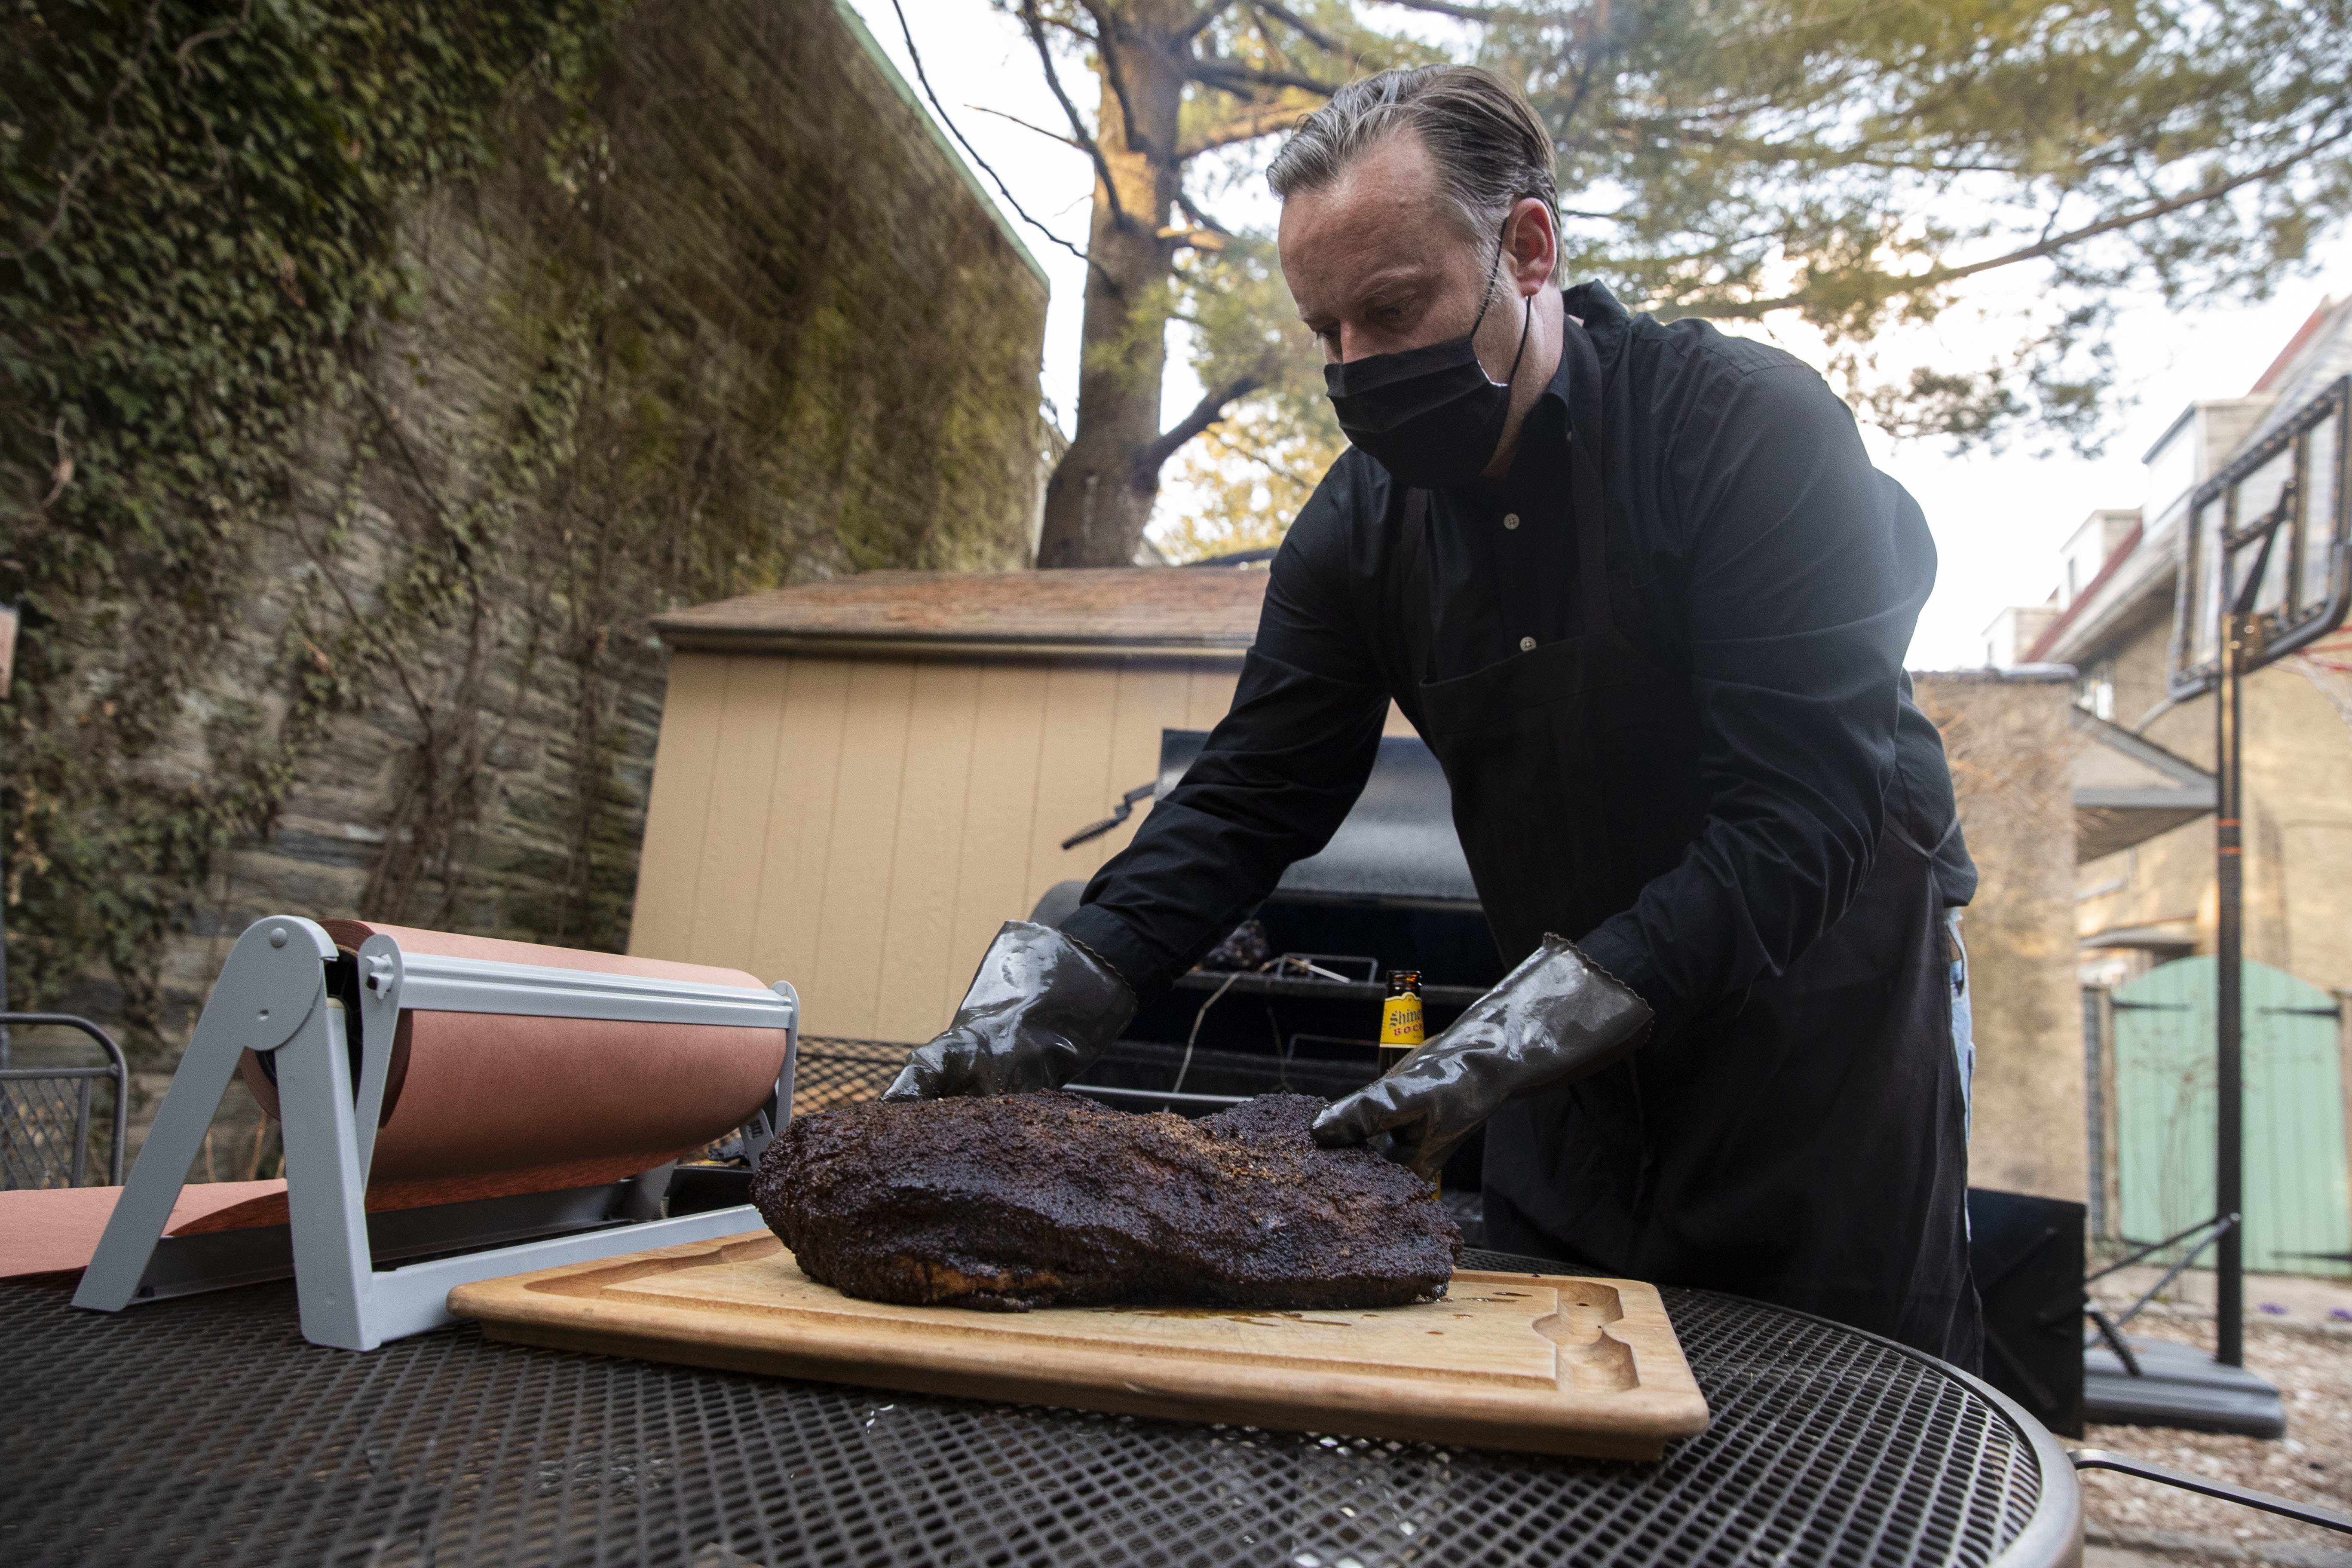 Scott Hanson places a whole brisket on a cutting board in his backyard in the Chestnut Hill neighborhood of Philadelphia, Pa. on Sunday, March 14, 2021. Scott Hanson, a history and social justice professor, is launching a weekly pop-up collaboration with Cadence that starts March 21.